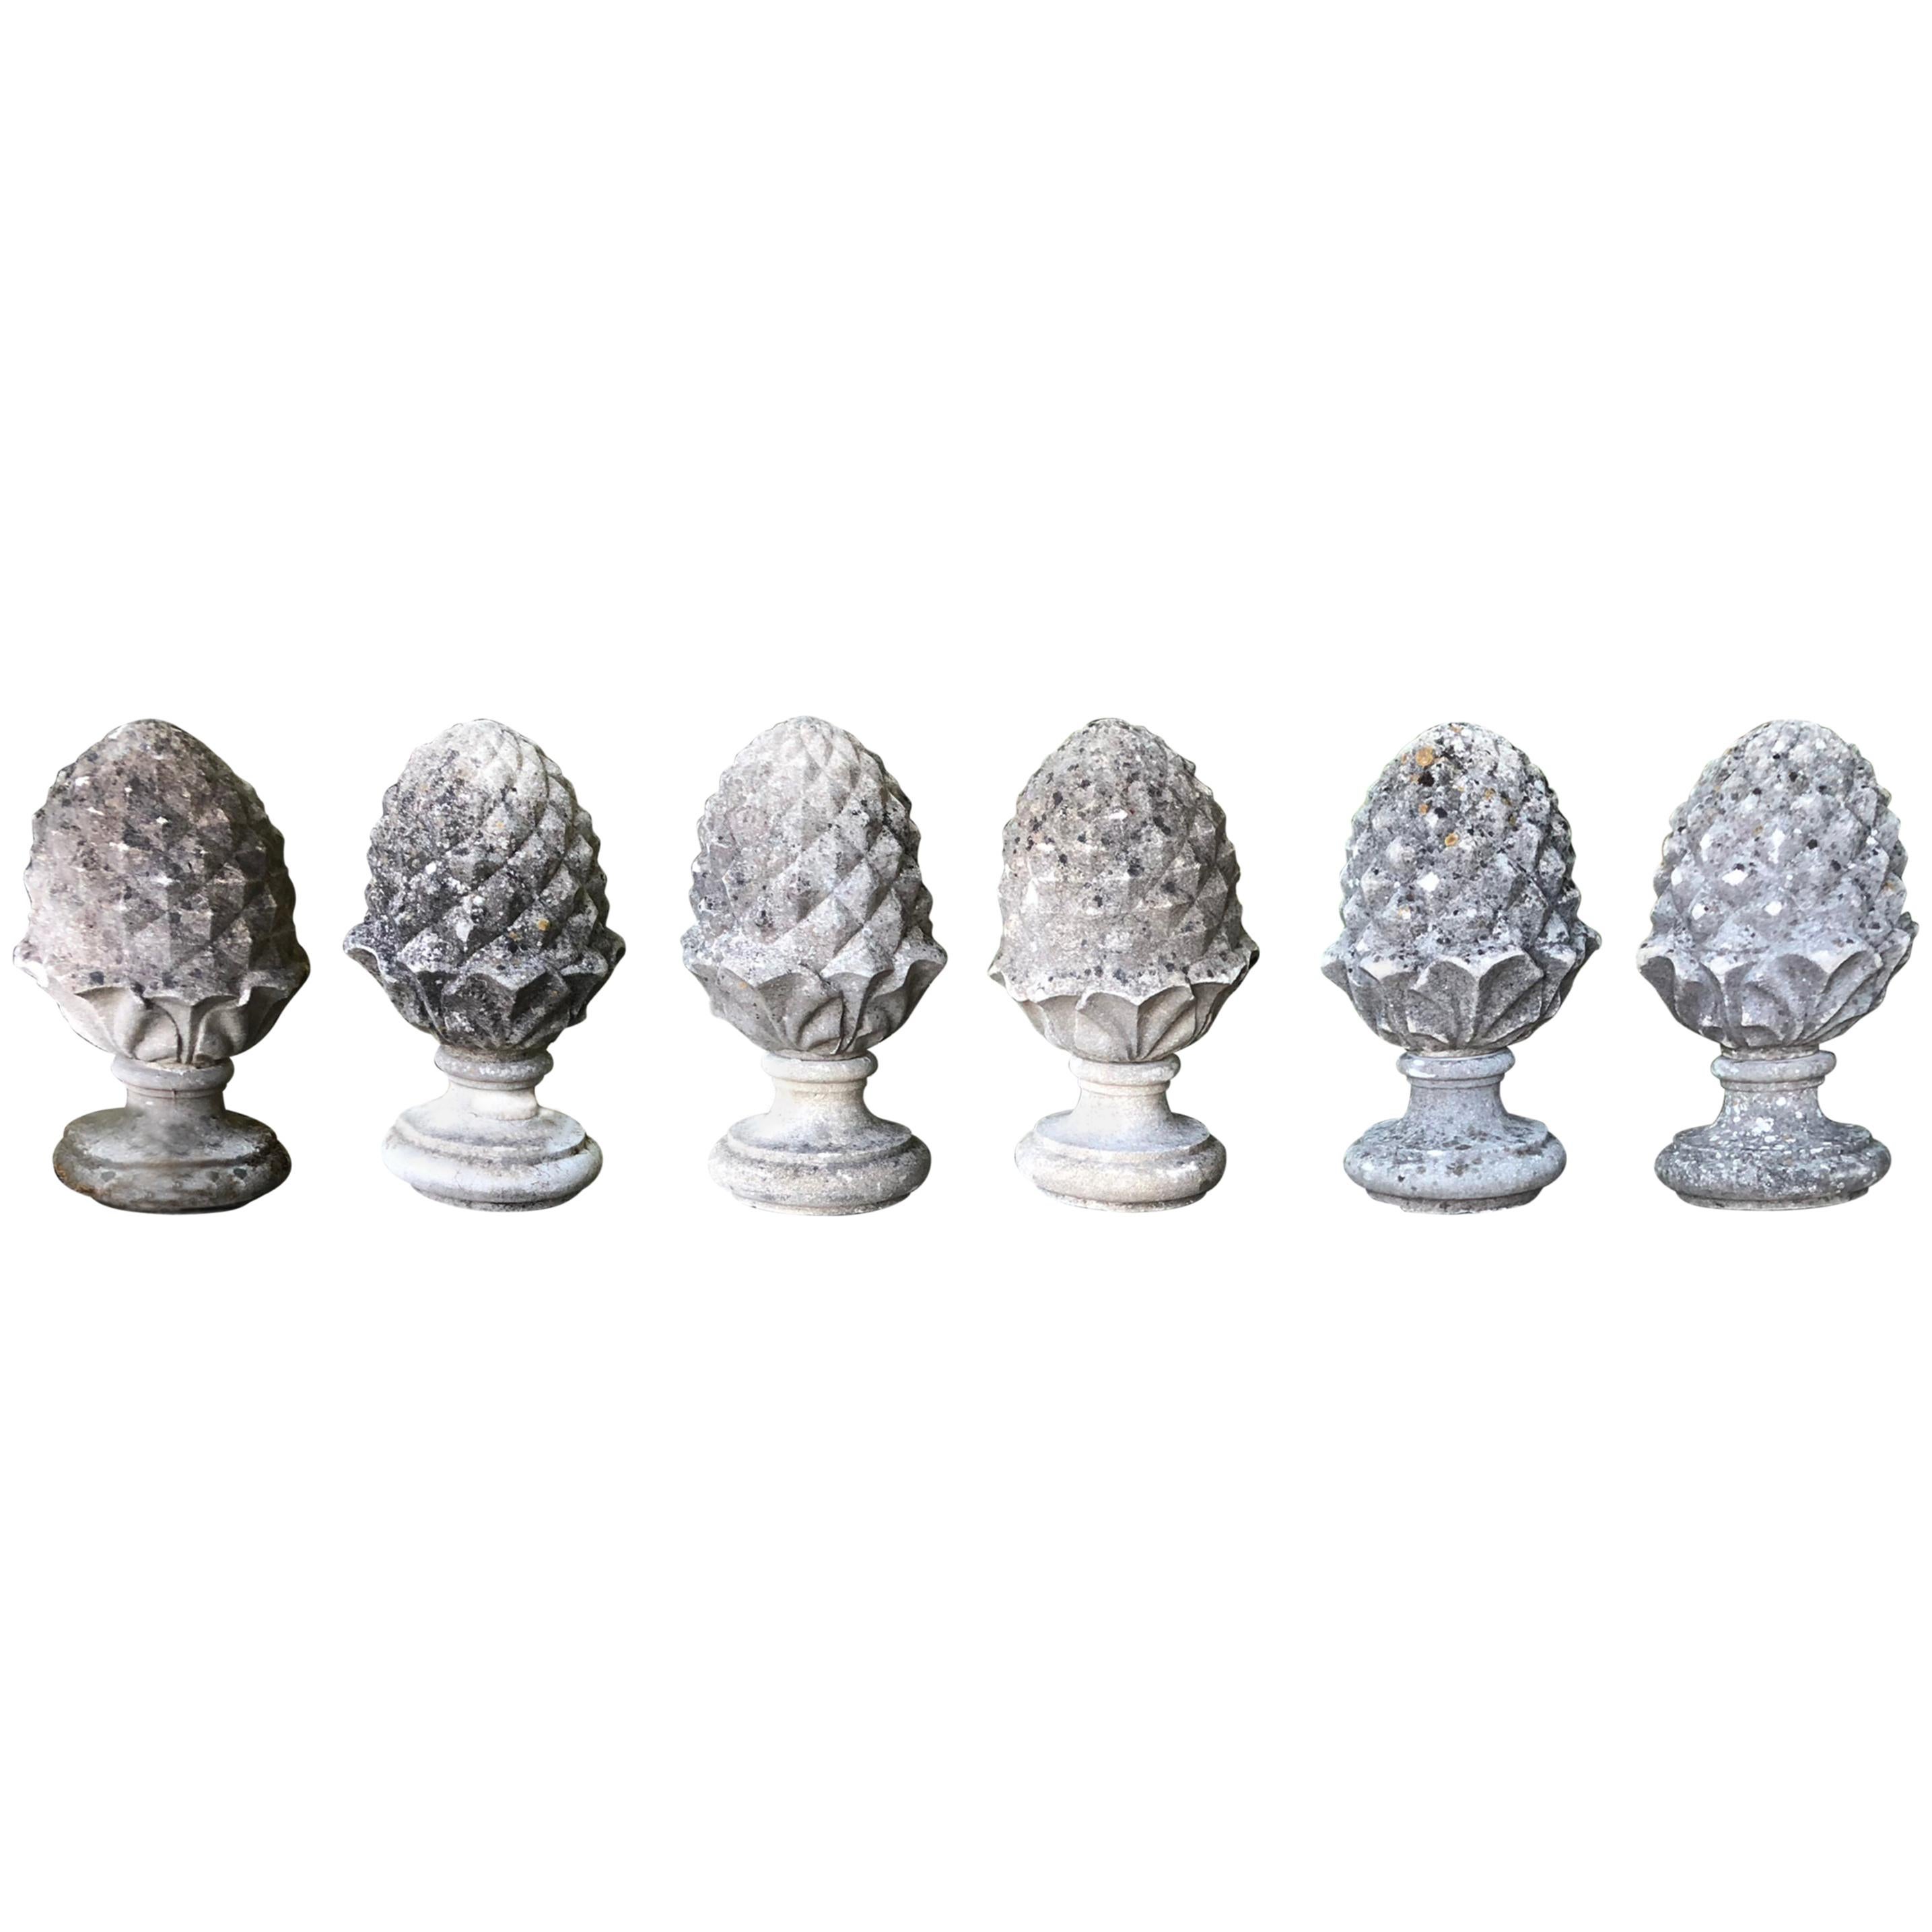 Pair of English Cast Stone Pineapple Finials